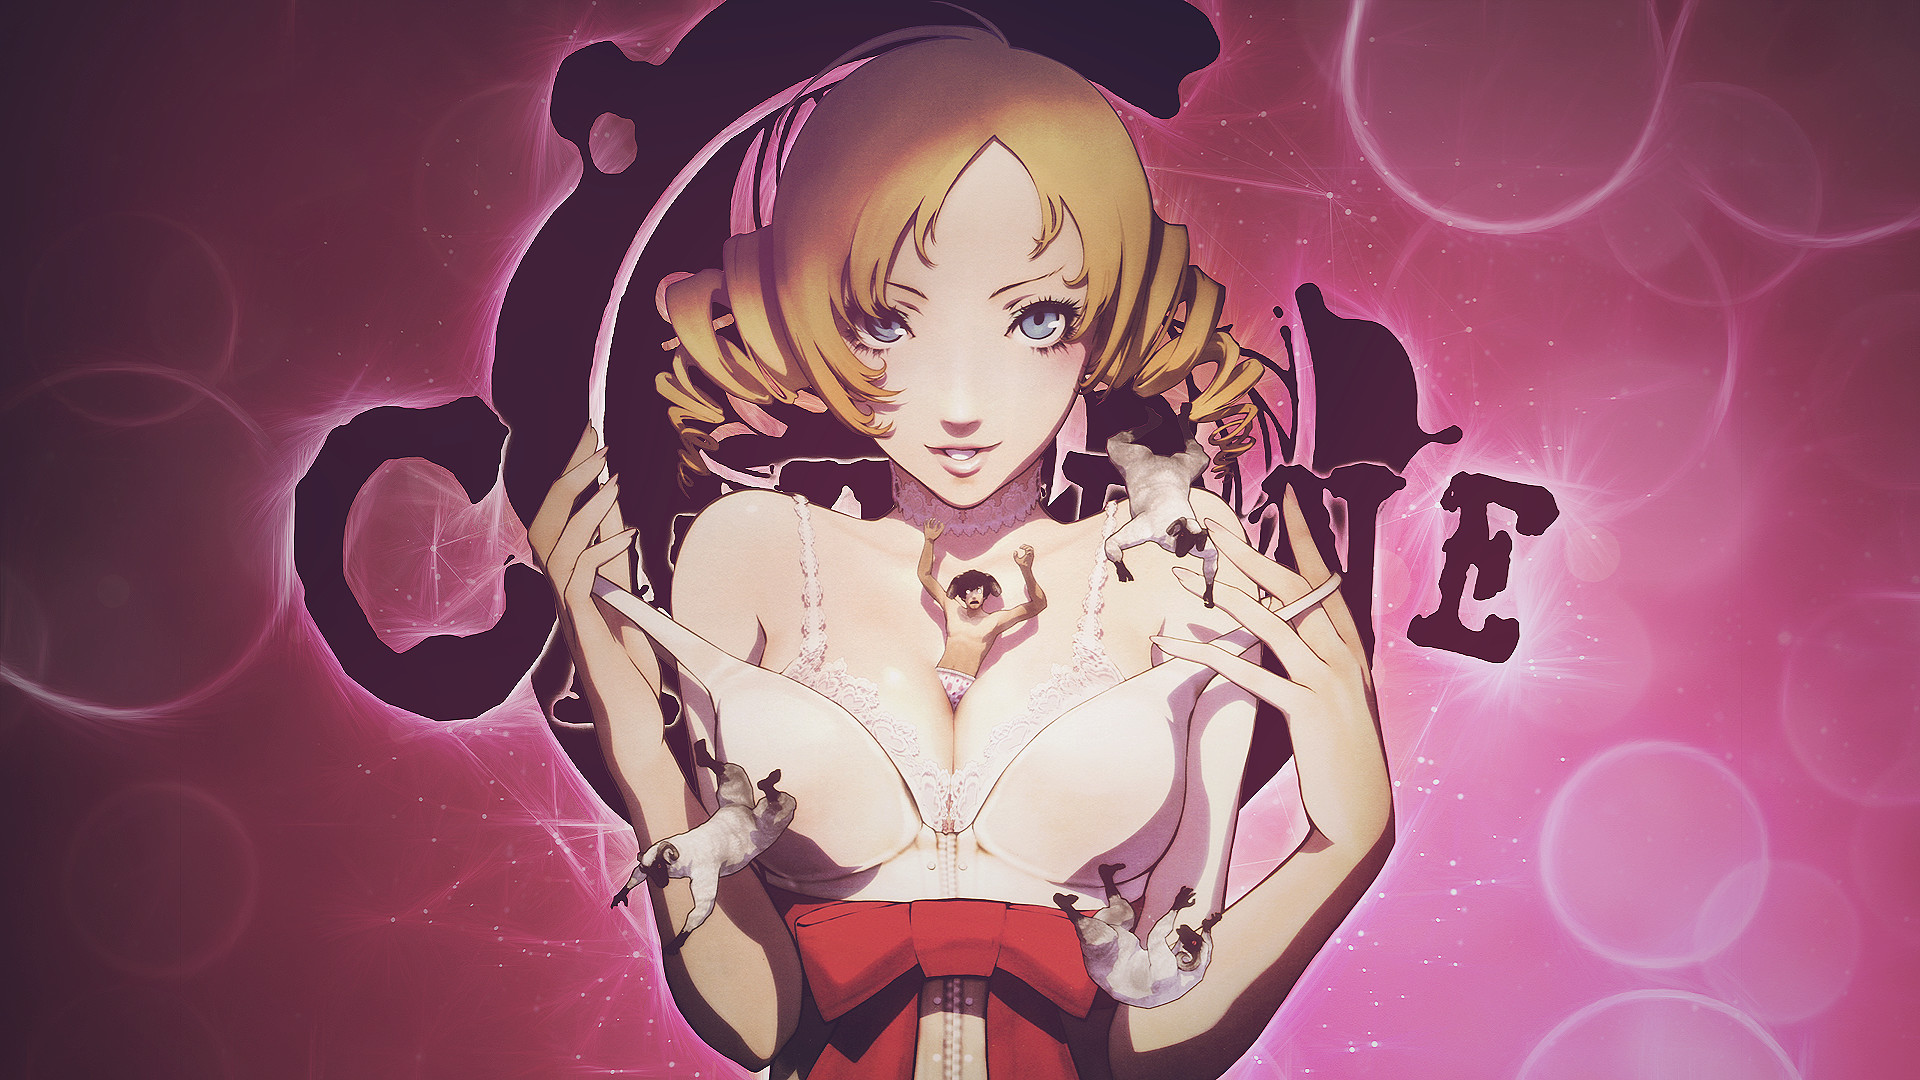 1920x1080 New Catherine game in the making (News) Playstation, Ps4, Xbox 360,